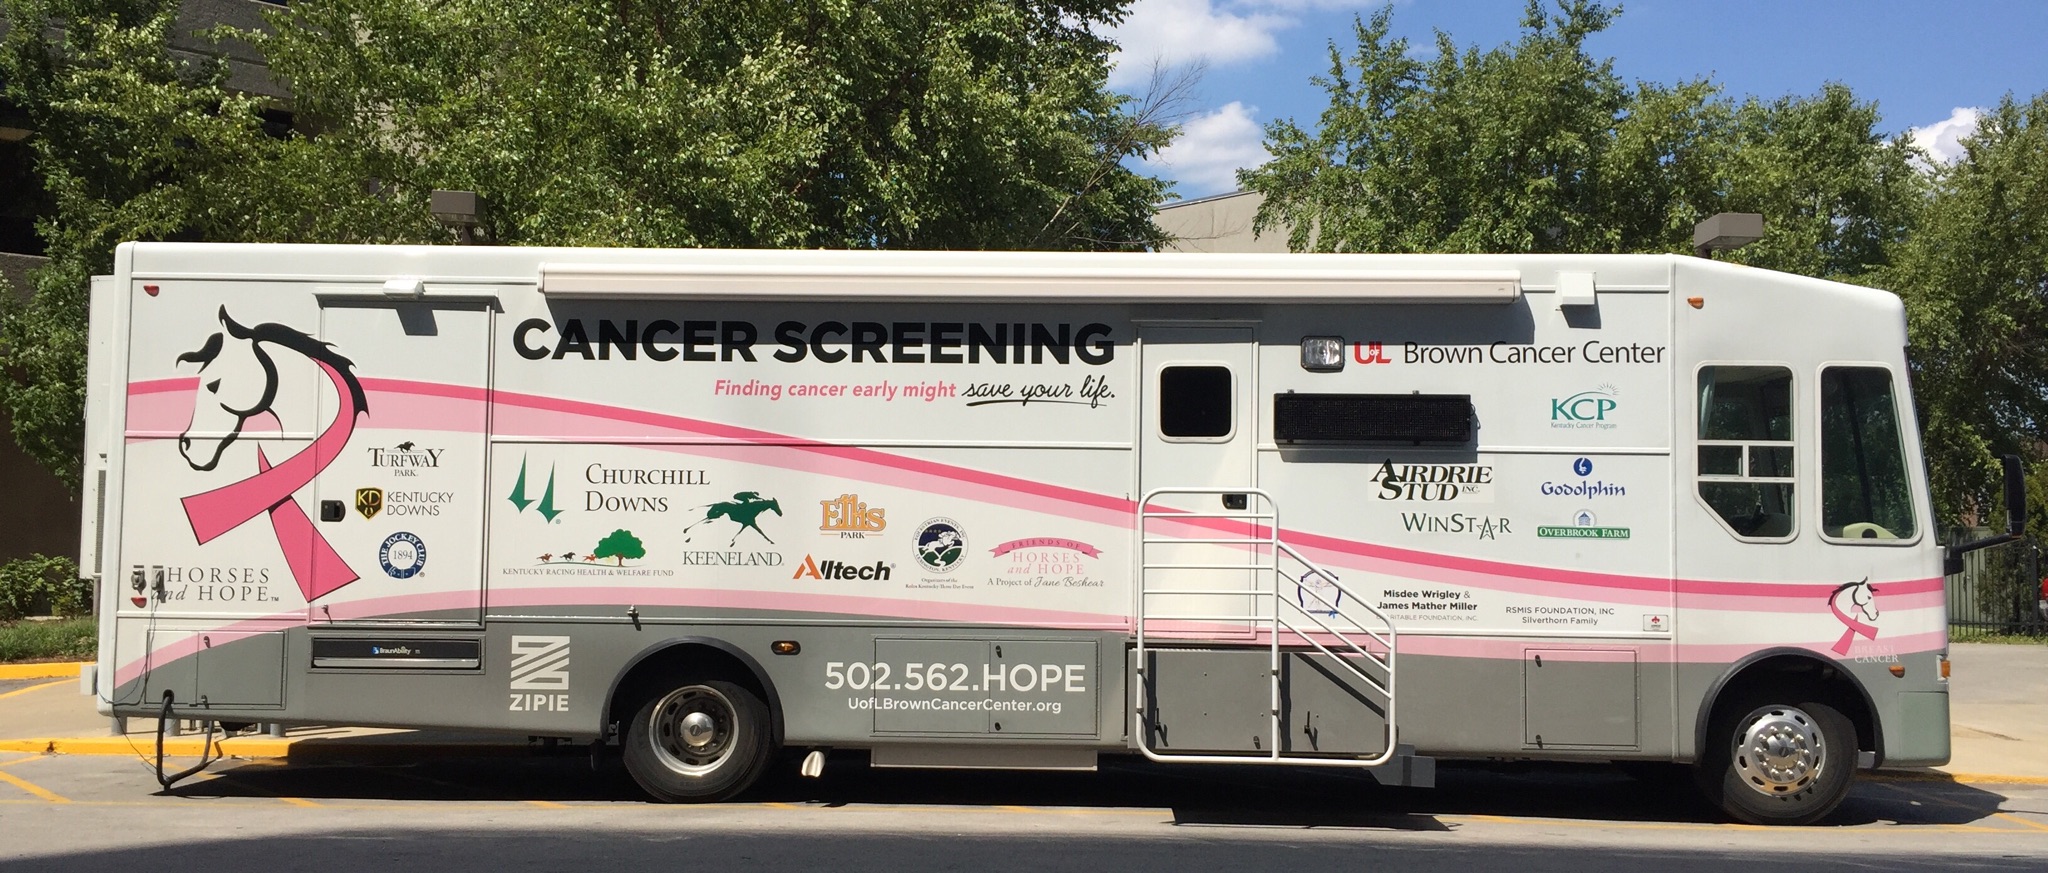 Putting cancer detection, prevention on the road